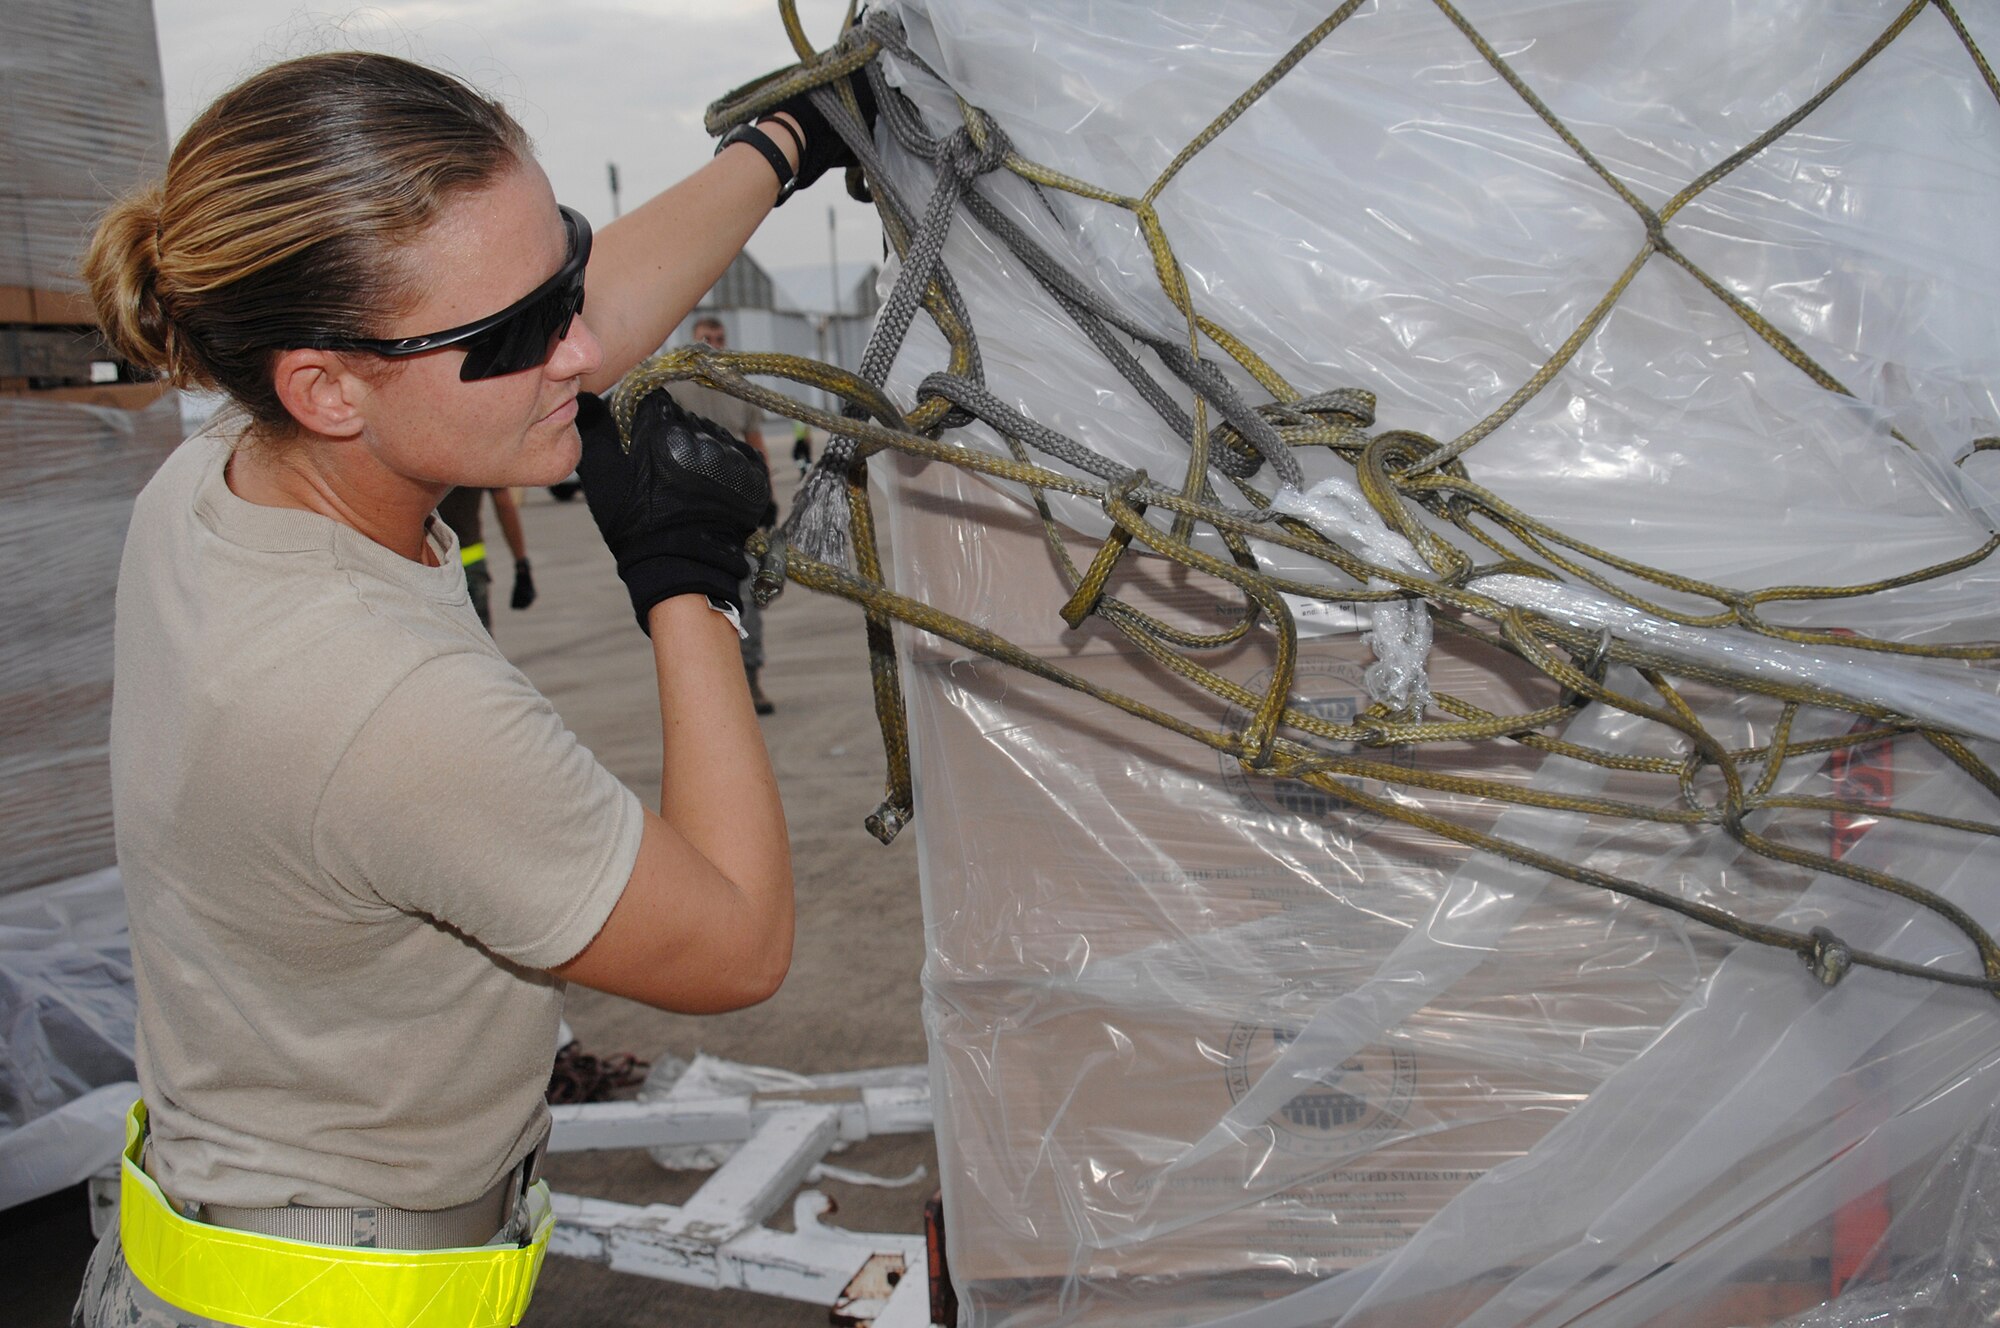 Utapao, Thailand - Staff Sgt Brandi Burns removes cargo netting during the download of humanitarian relief supplies being delivered to Burma May 16. SSgt Burns is forward deployed with the 736th Security Forces Squadron from Andersen AFB, Guam. (USAF photo/Senior Airman Sonya Croston)(RELEASED)